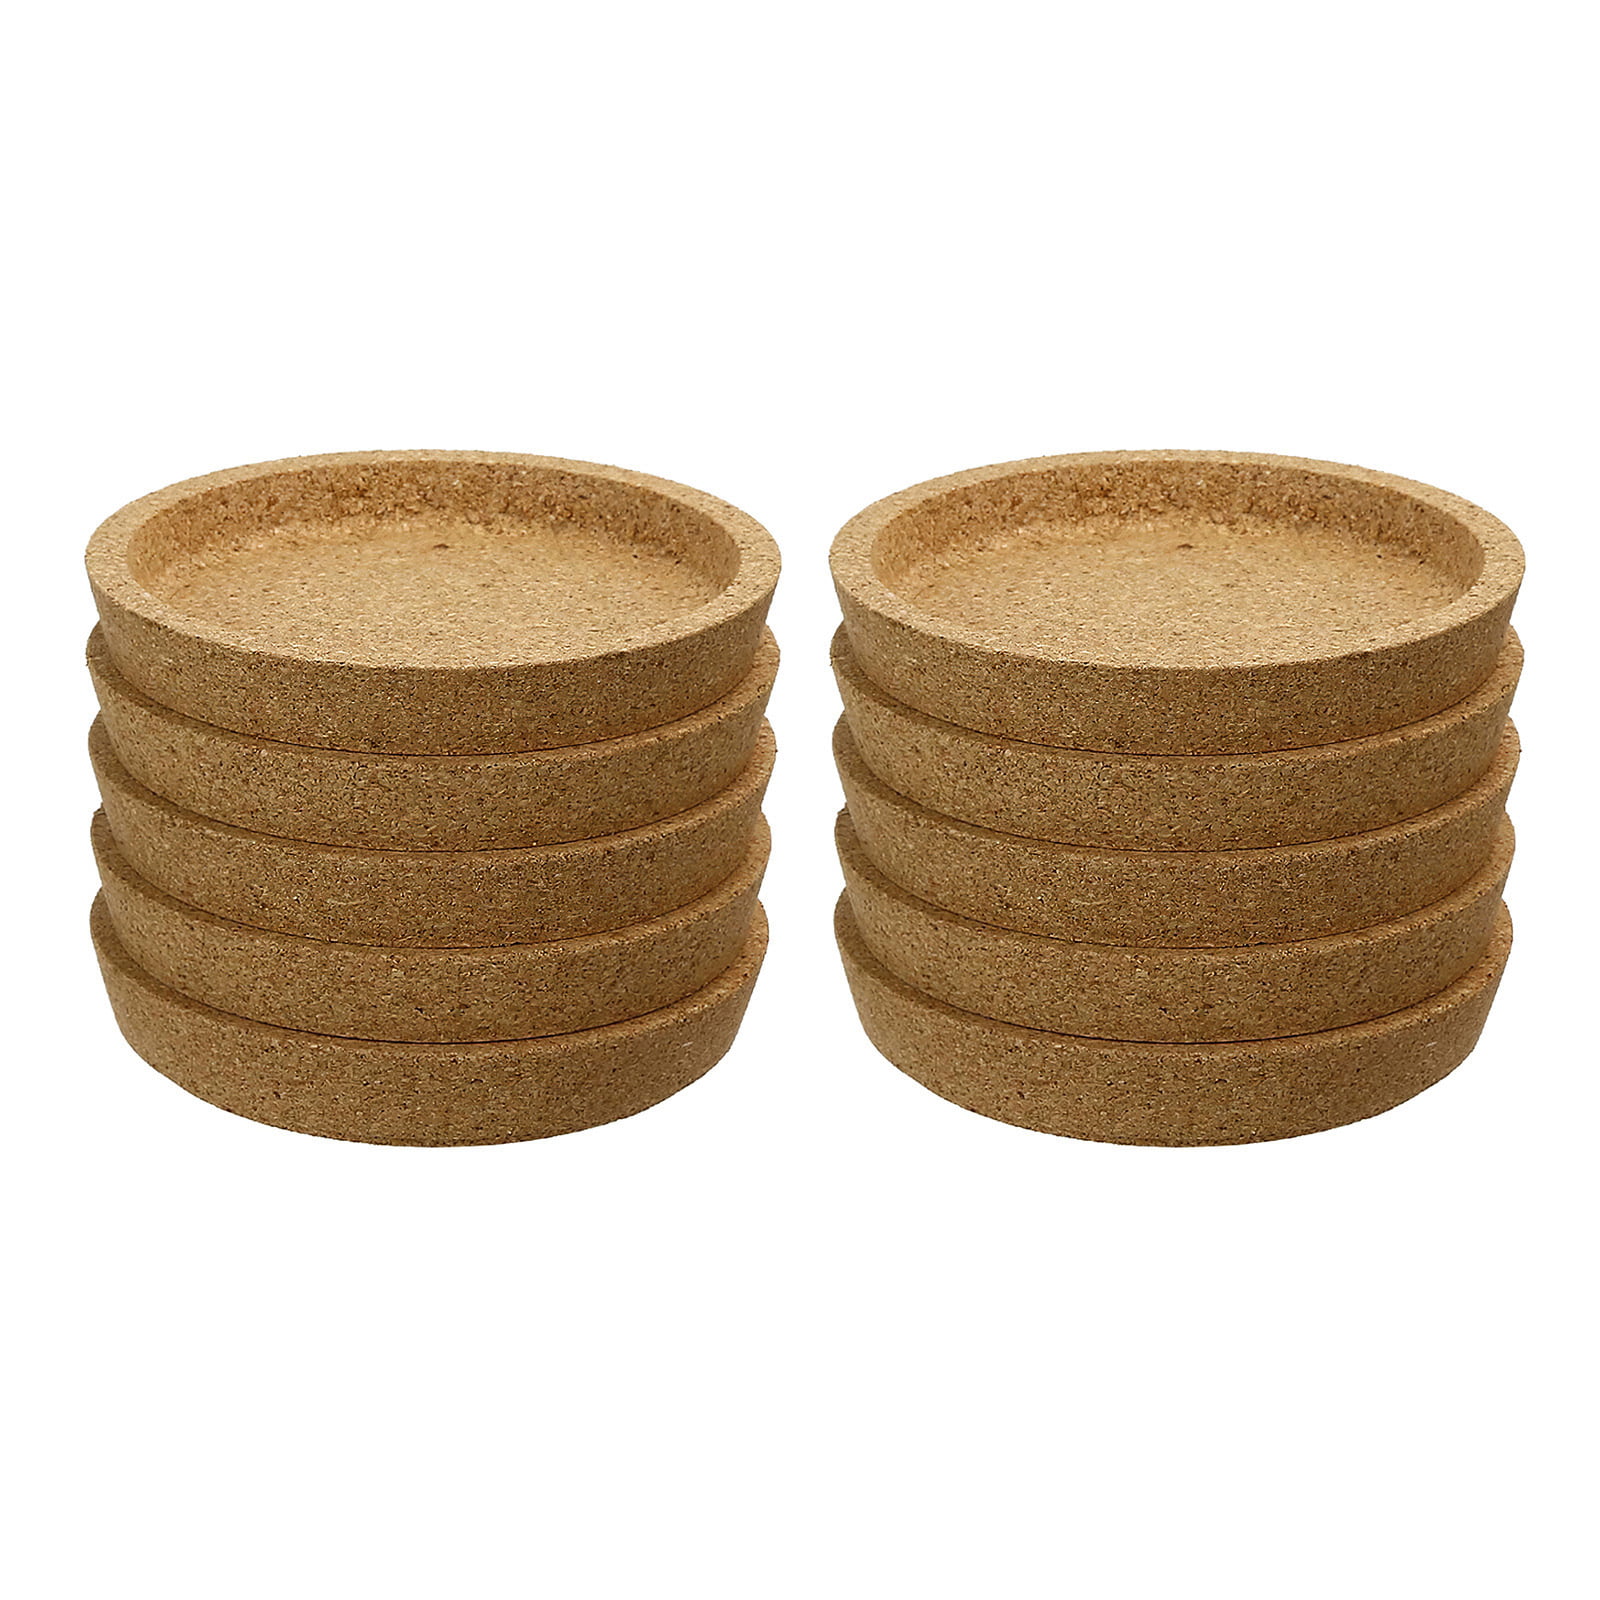 8 Pcs Cork Coasters Round Insulation Pads Drink Coasters for Protecting Desk 